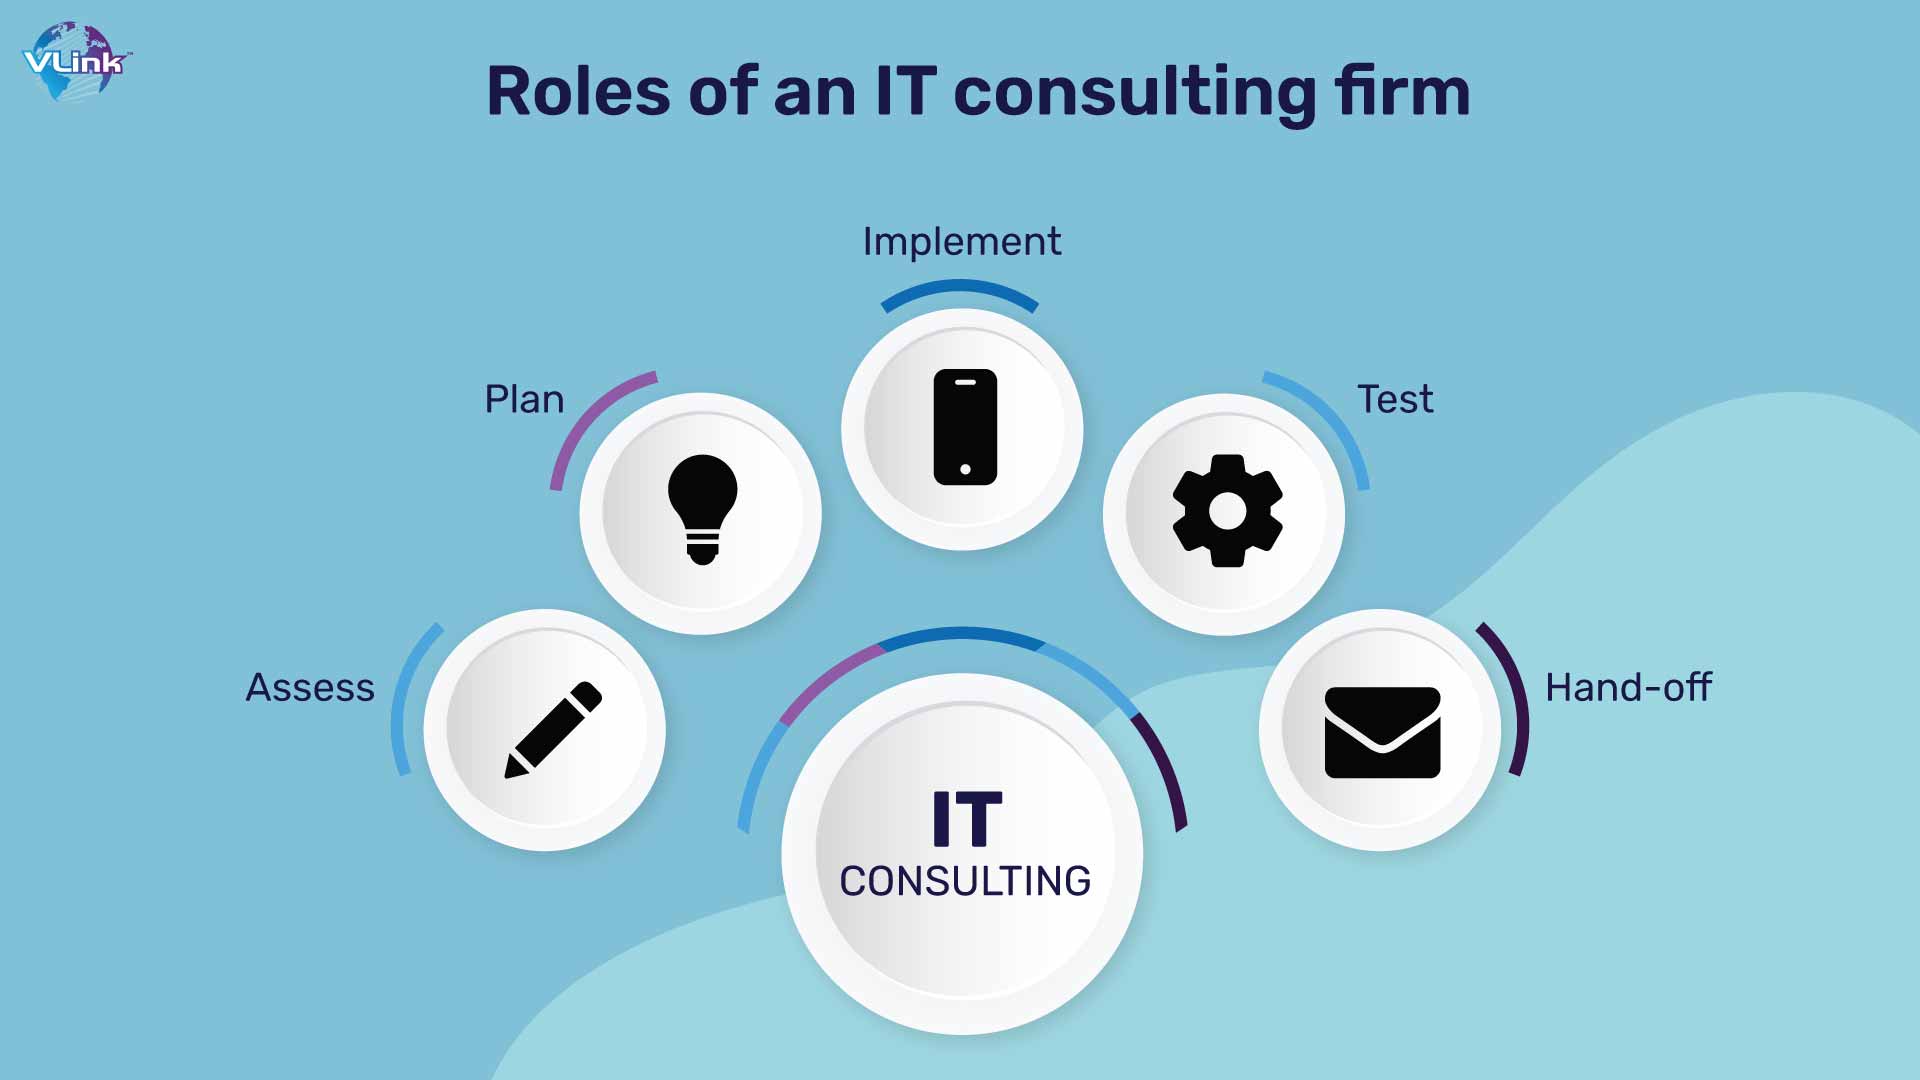 Roles of an IT consulting firm